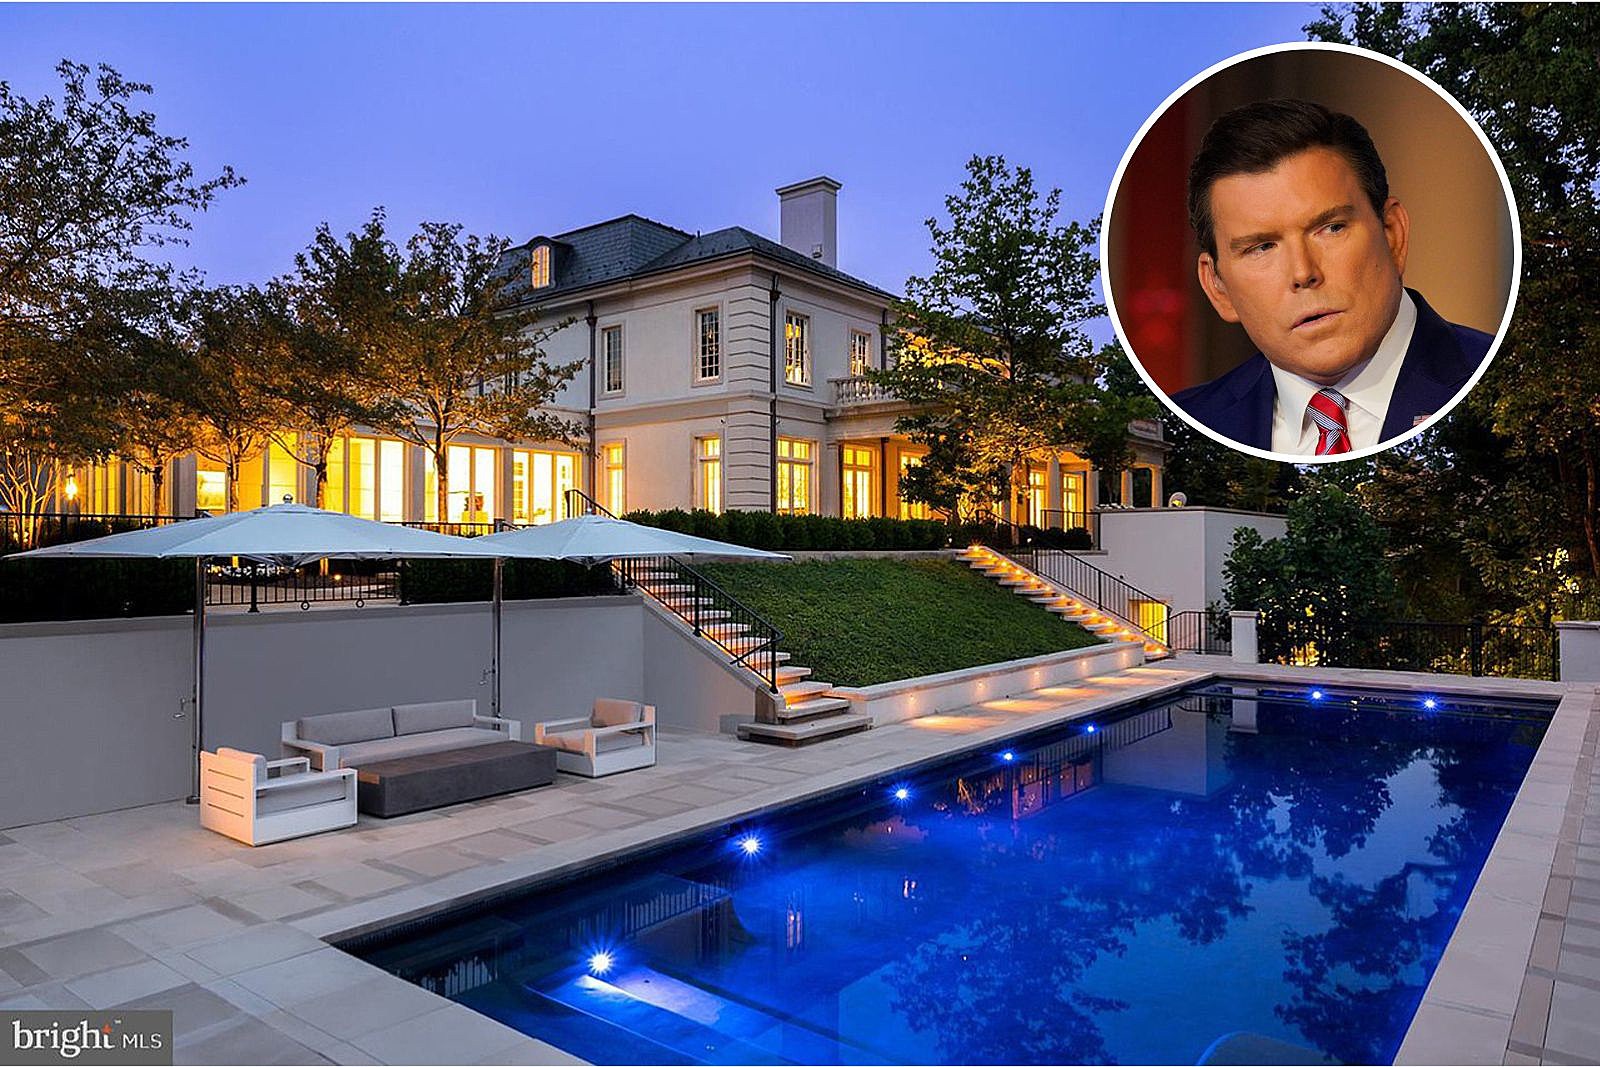 Fox News Anchor Bret Baier Selling Staggering $32 Million Mansion